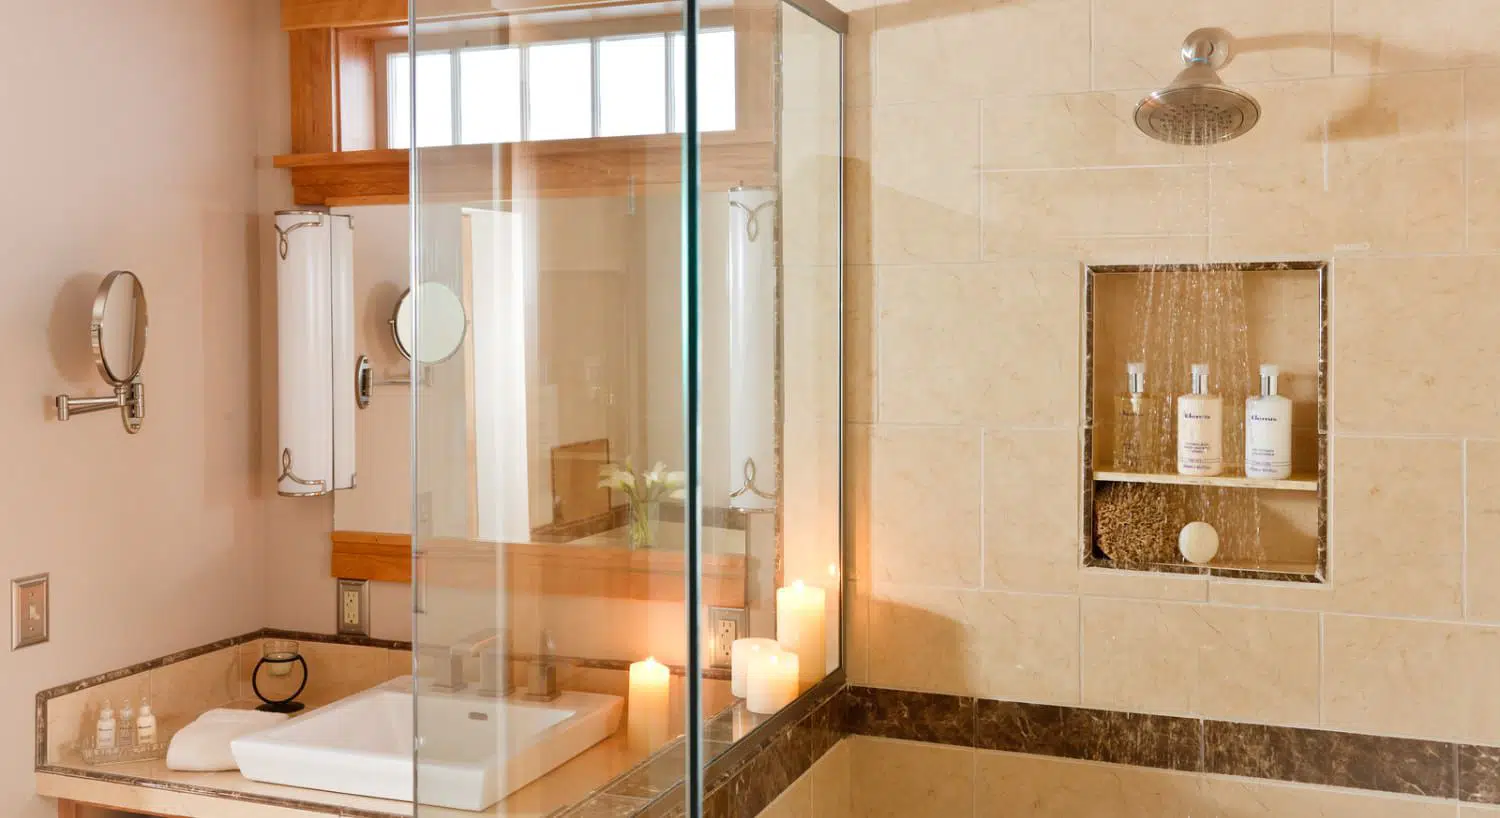 Bathroom with glass enclosed light-colored tiled shower and white sink